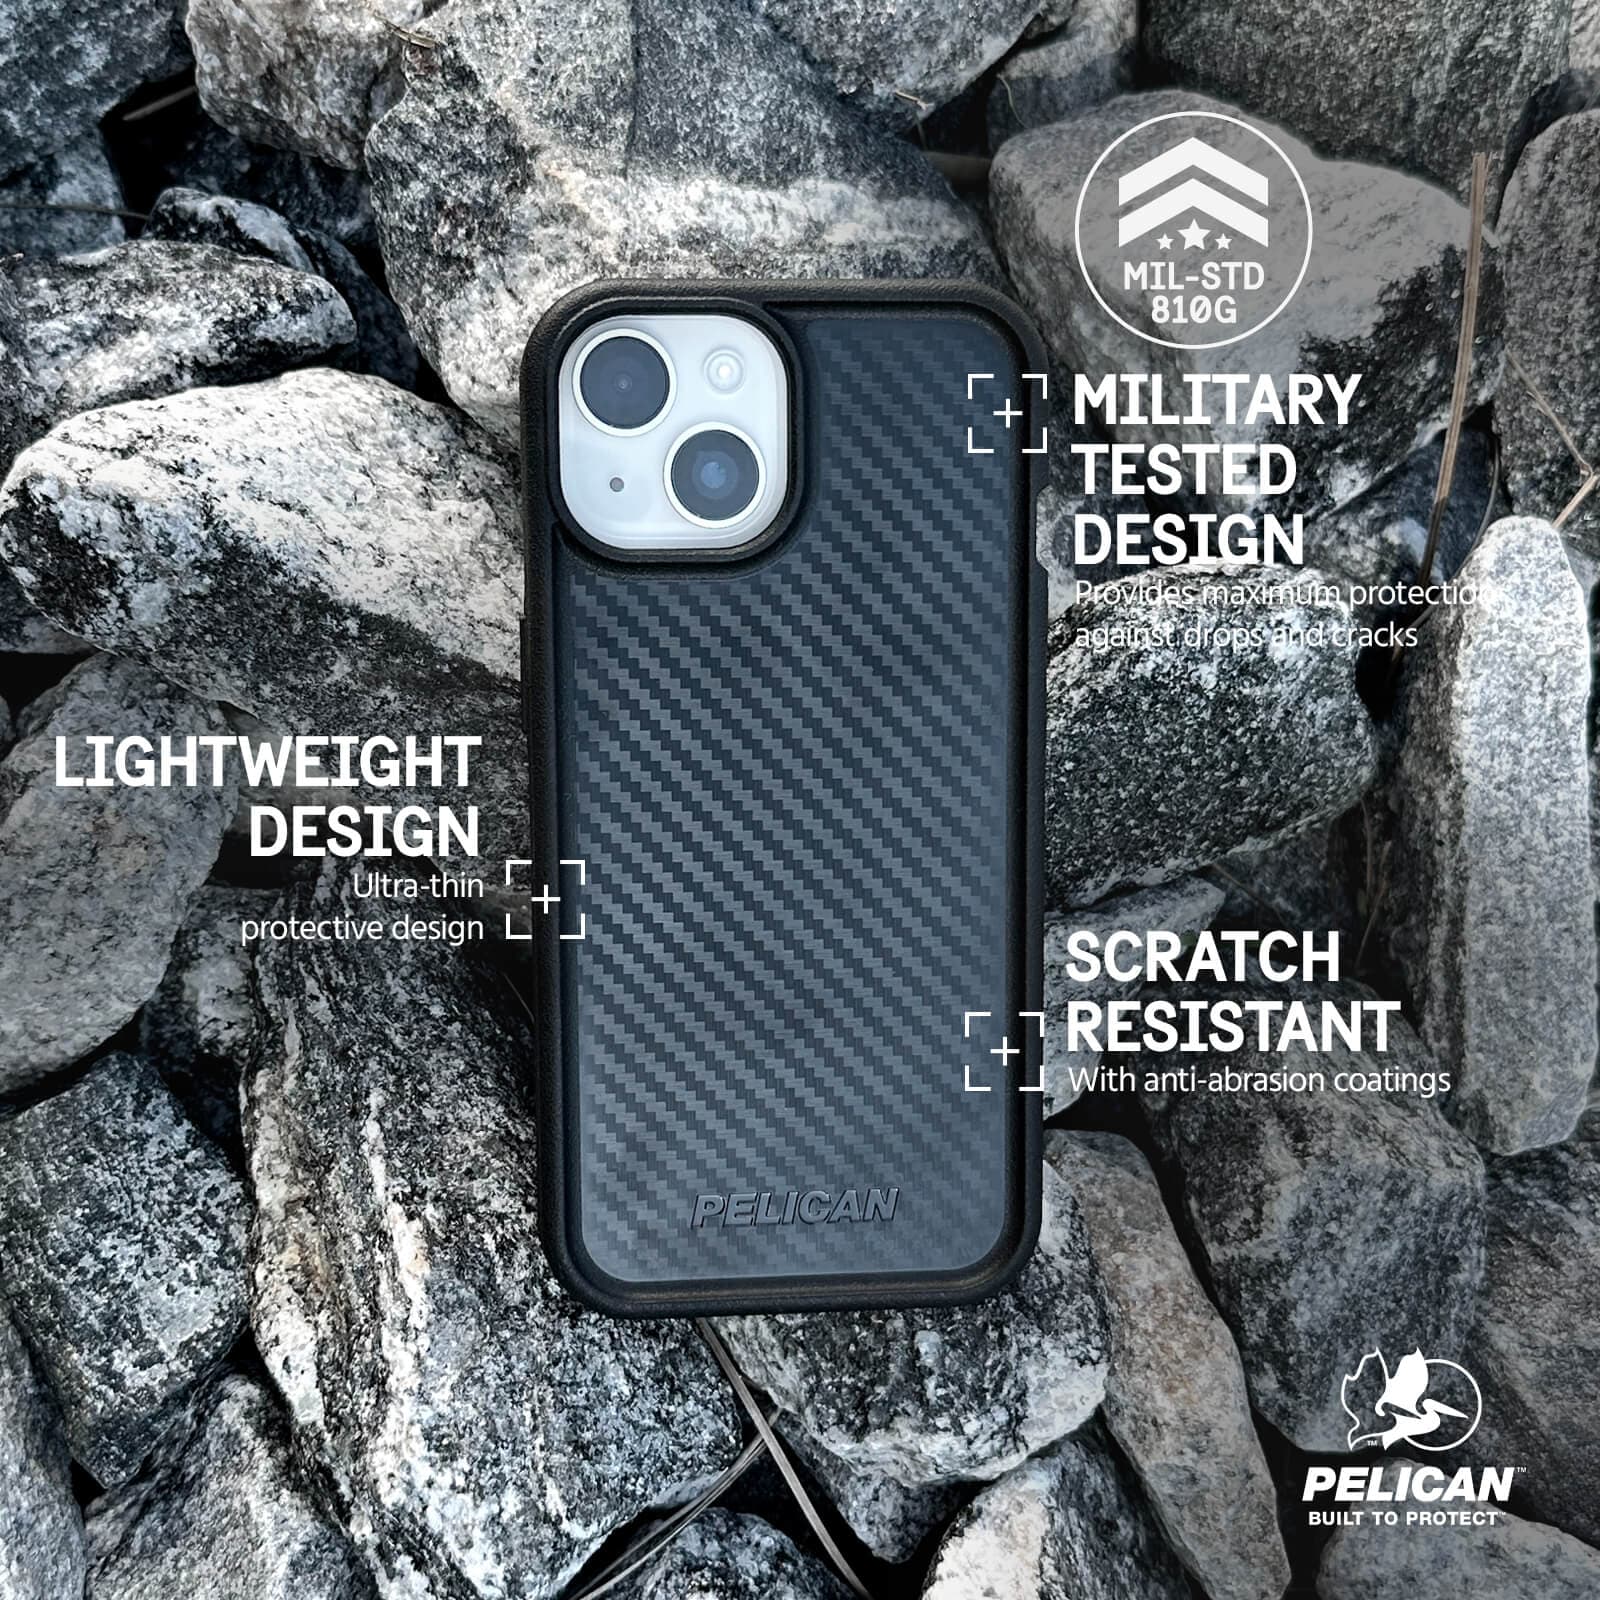 MILITARY TESTED DESIGN. PROVIDES MAXIMUM PROTECTION AGAINST DROPS AND CRACKS. SCRATCH RESISTANT WITH ANTI-ABRASION COATINGS.